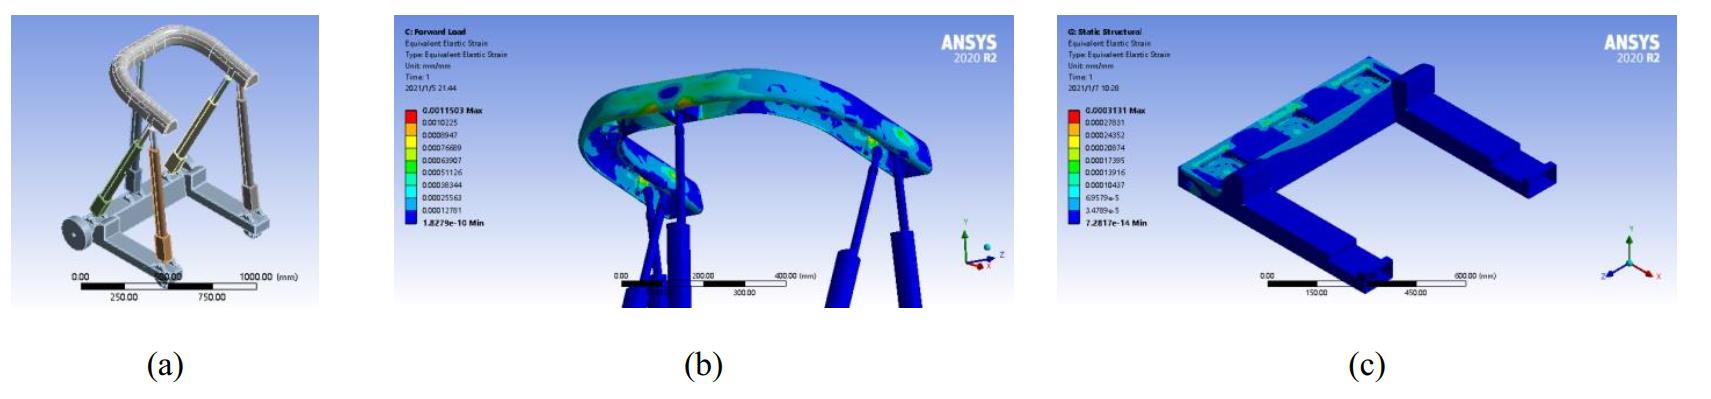 Fig. 2 ANSYS simulation. (a)Simplified model. (b) Stress nephogram of the platform. (c) Stress nephogram of the base.